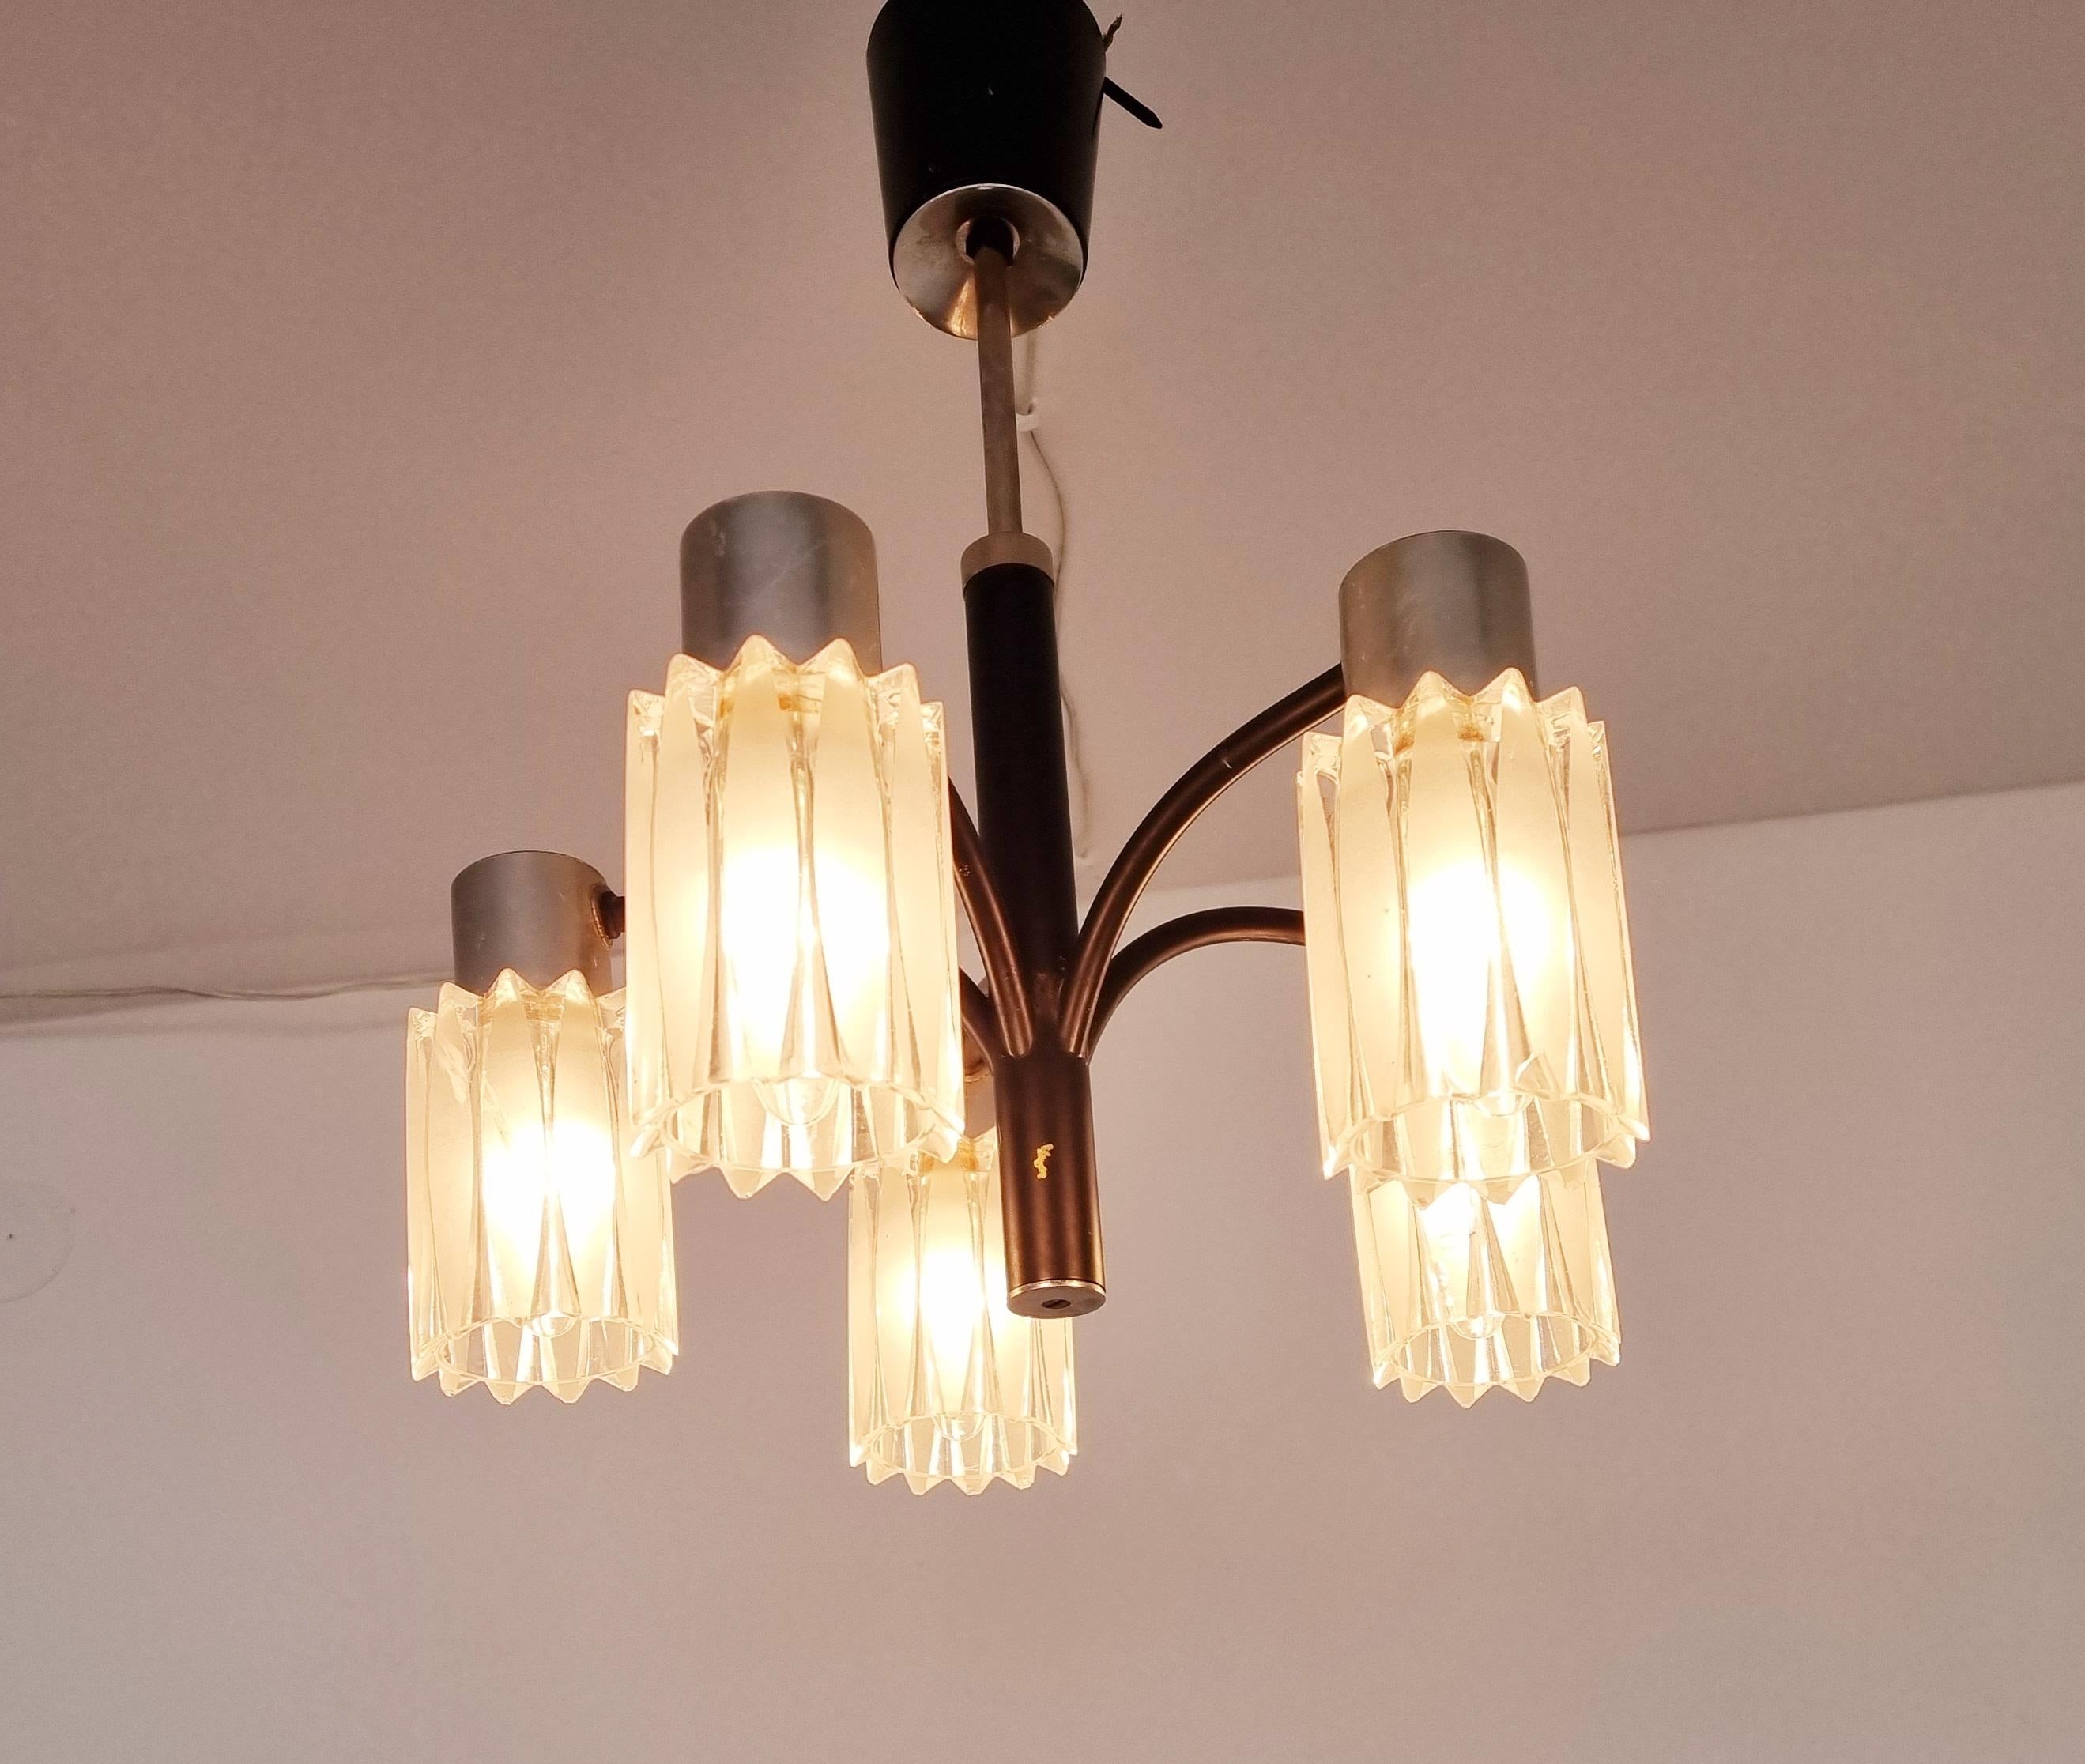 Very Rare Midcentury Chandelier, Murano Glass, Italy, 1960s For Sale 4